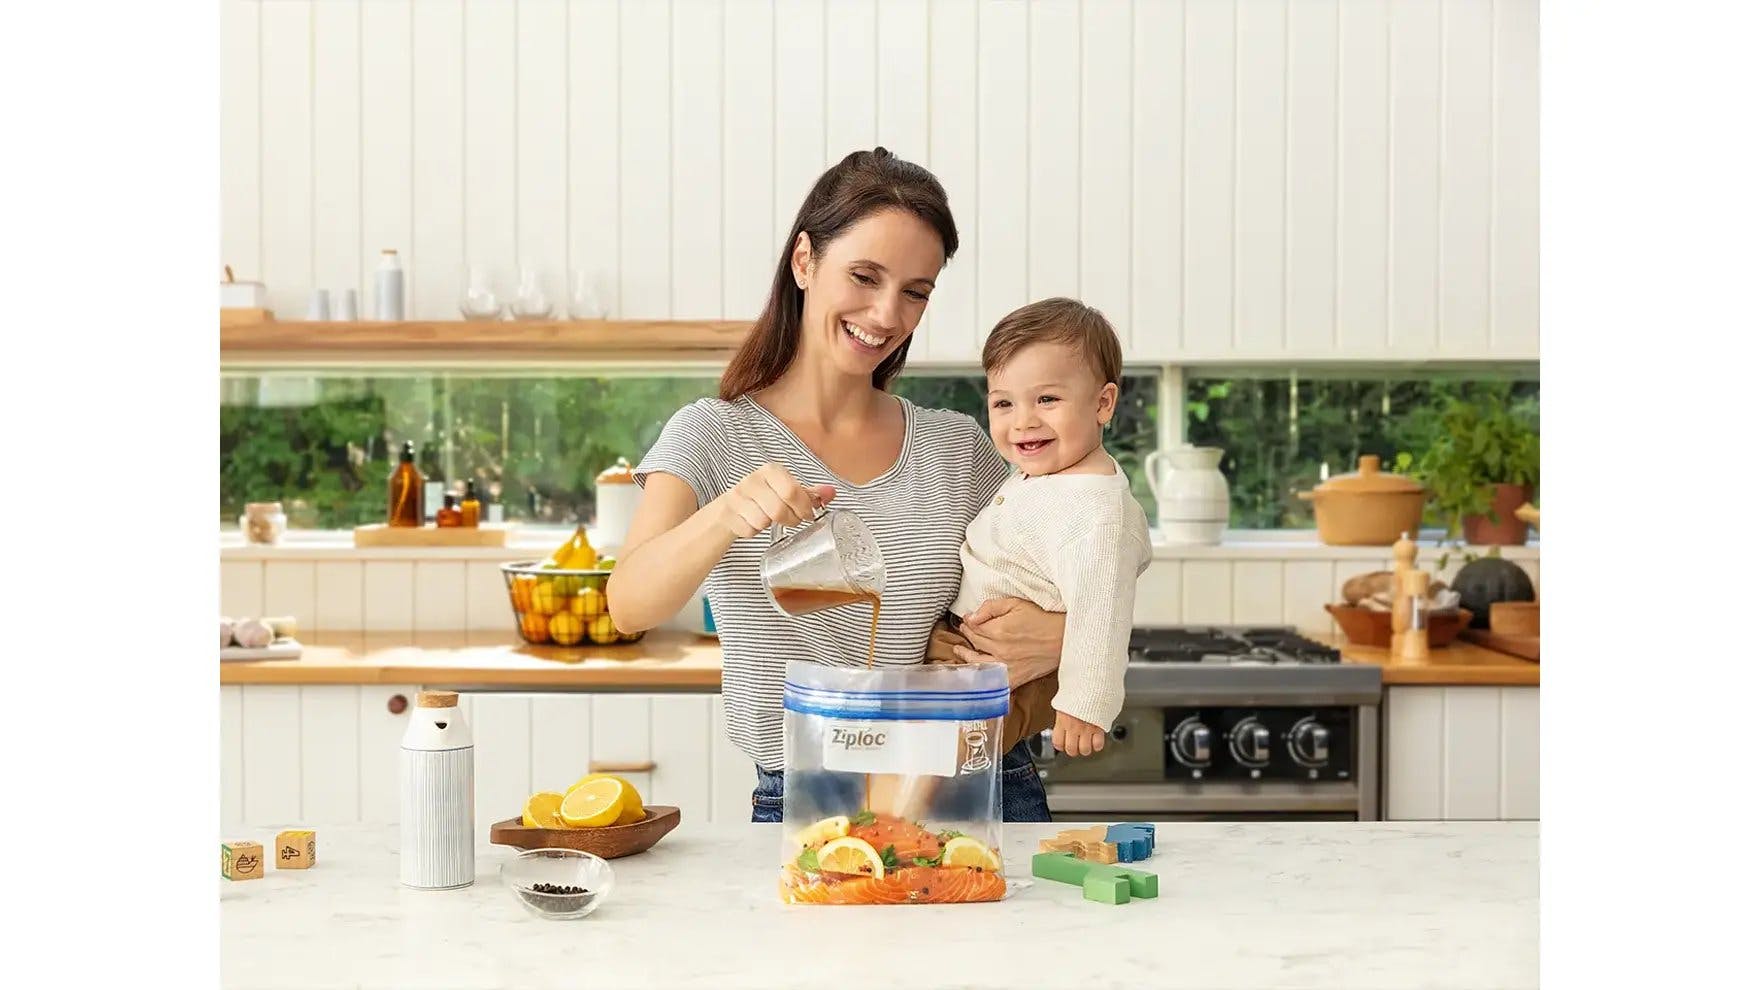 Woman holding a baby and pouring marinade into a Ziploc bag of salmon.